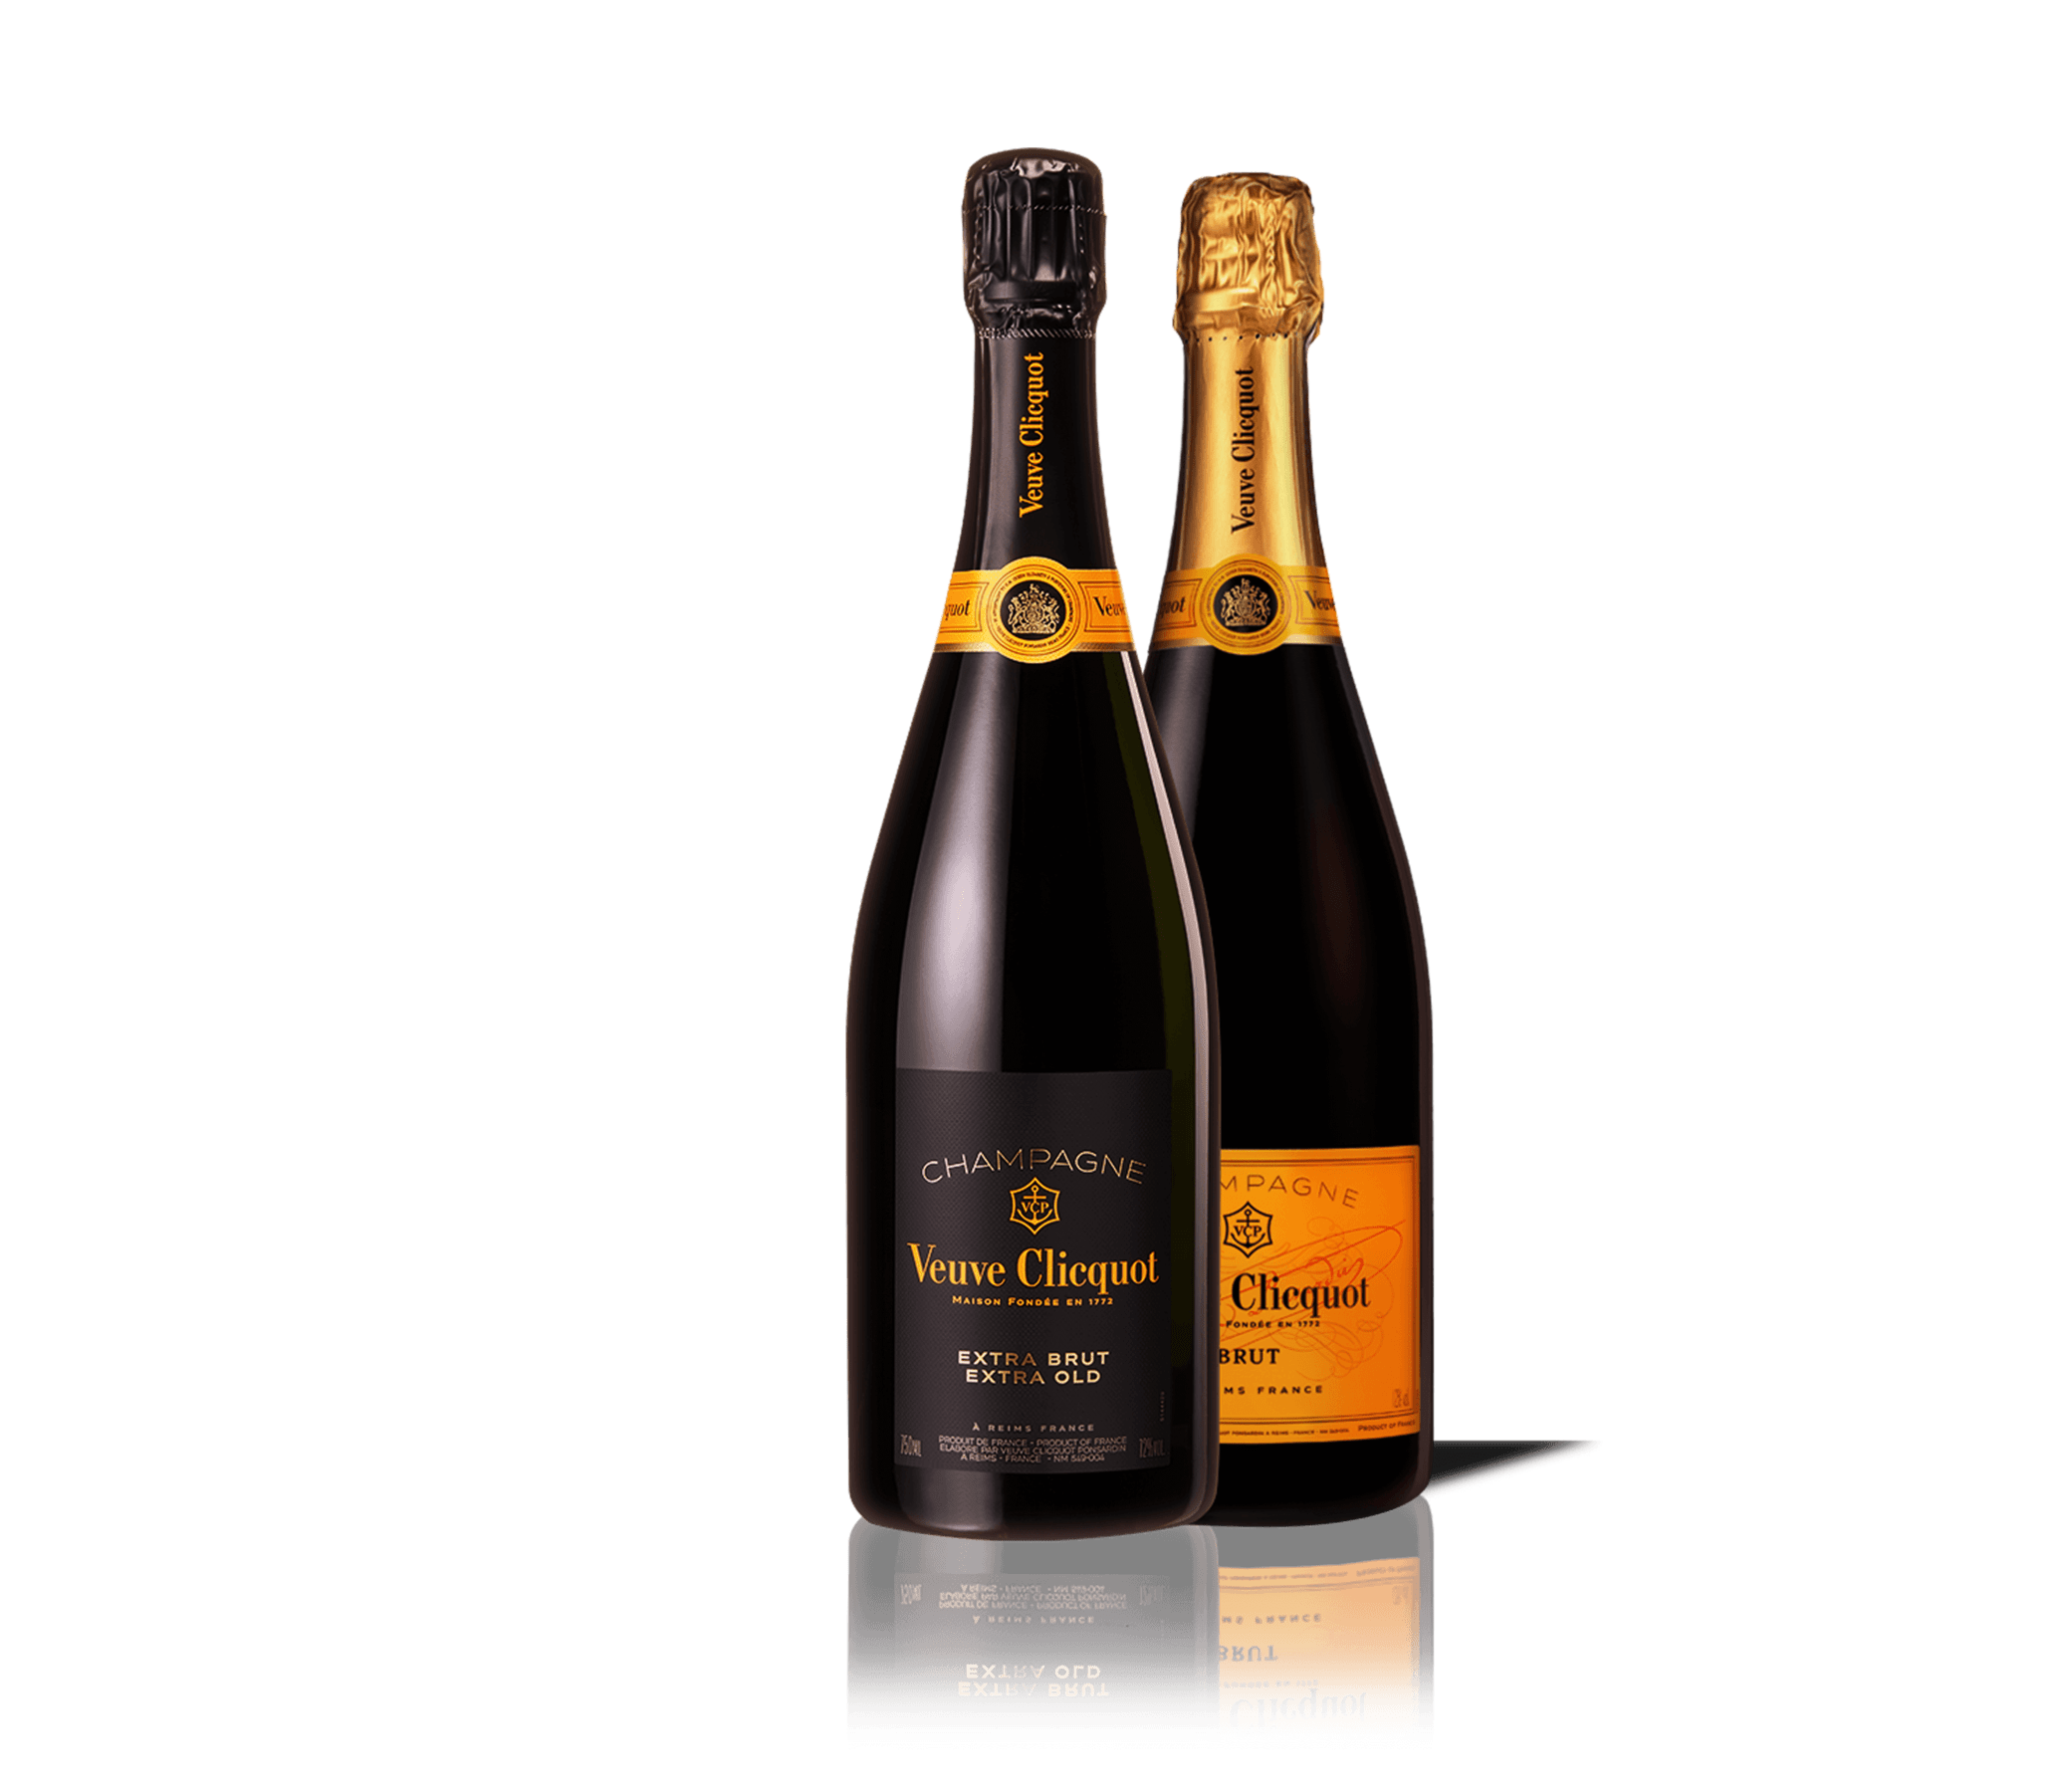 Bottle Veuve Clicquot Champagne Extra Brut Extra Old 1